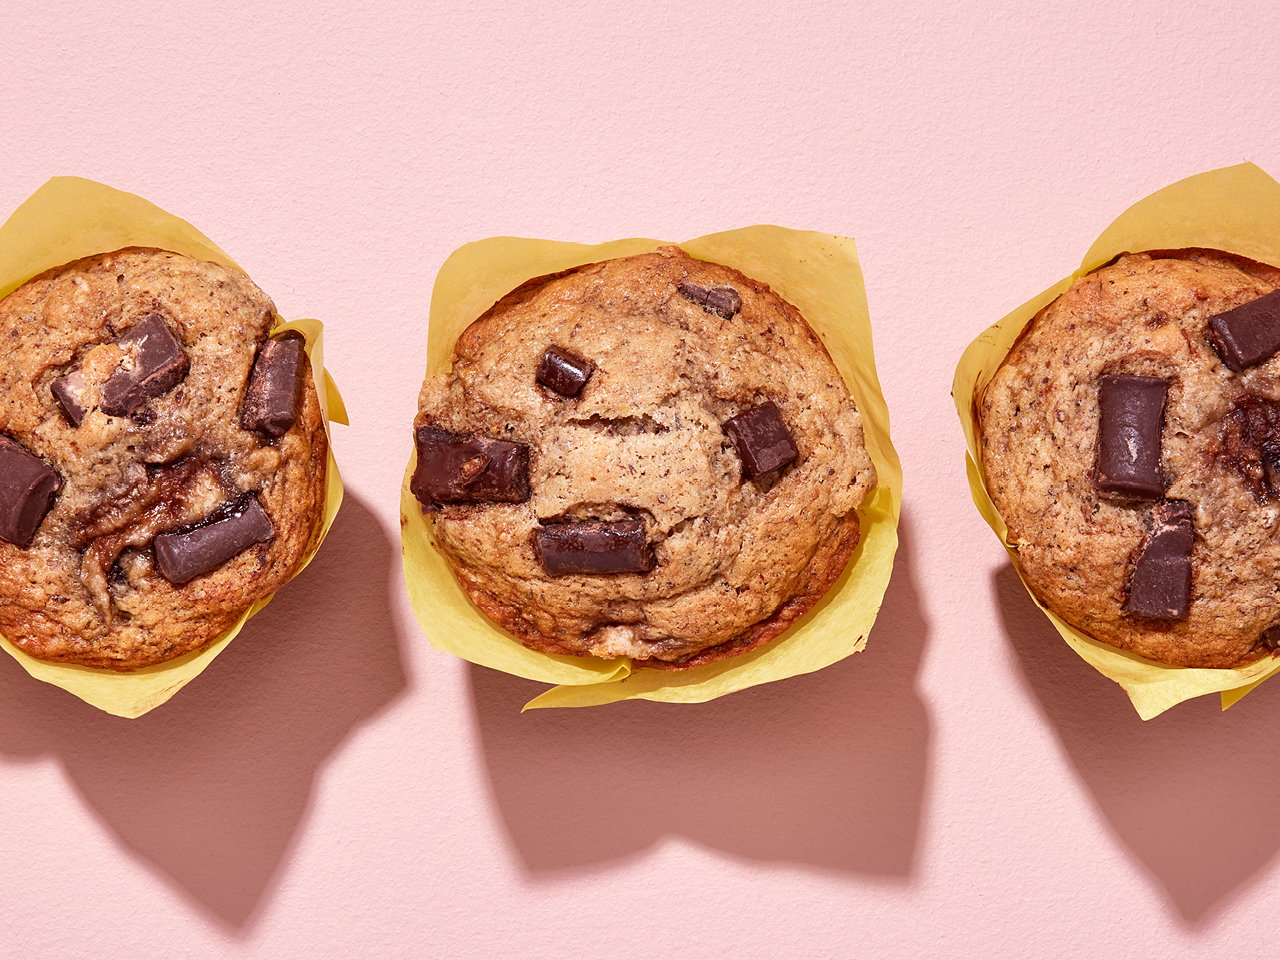 Three vegan banana chocolate chunk muffins in yellow wrapper on a pink background